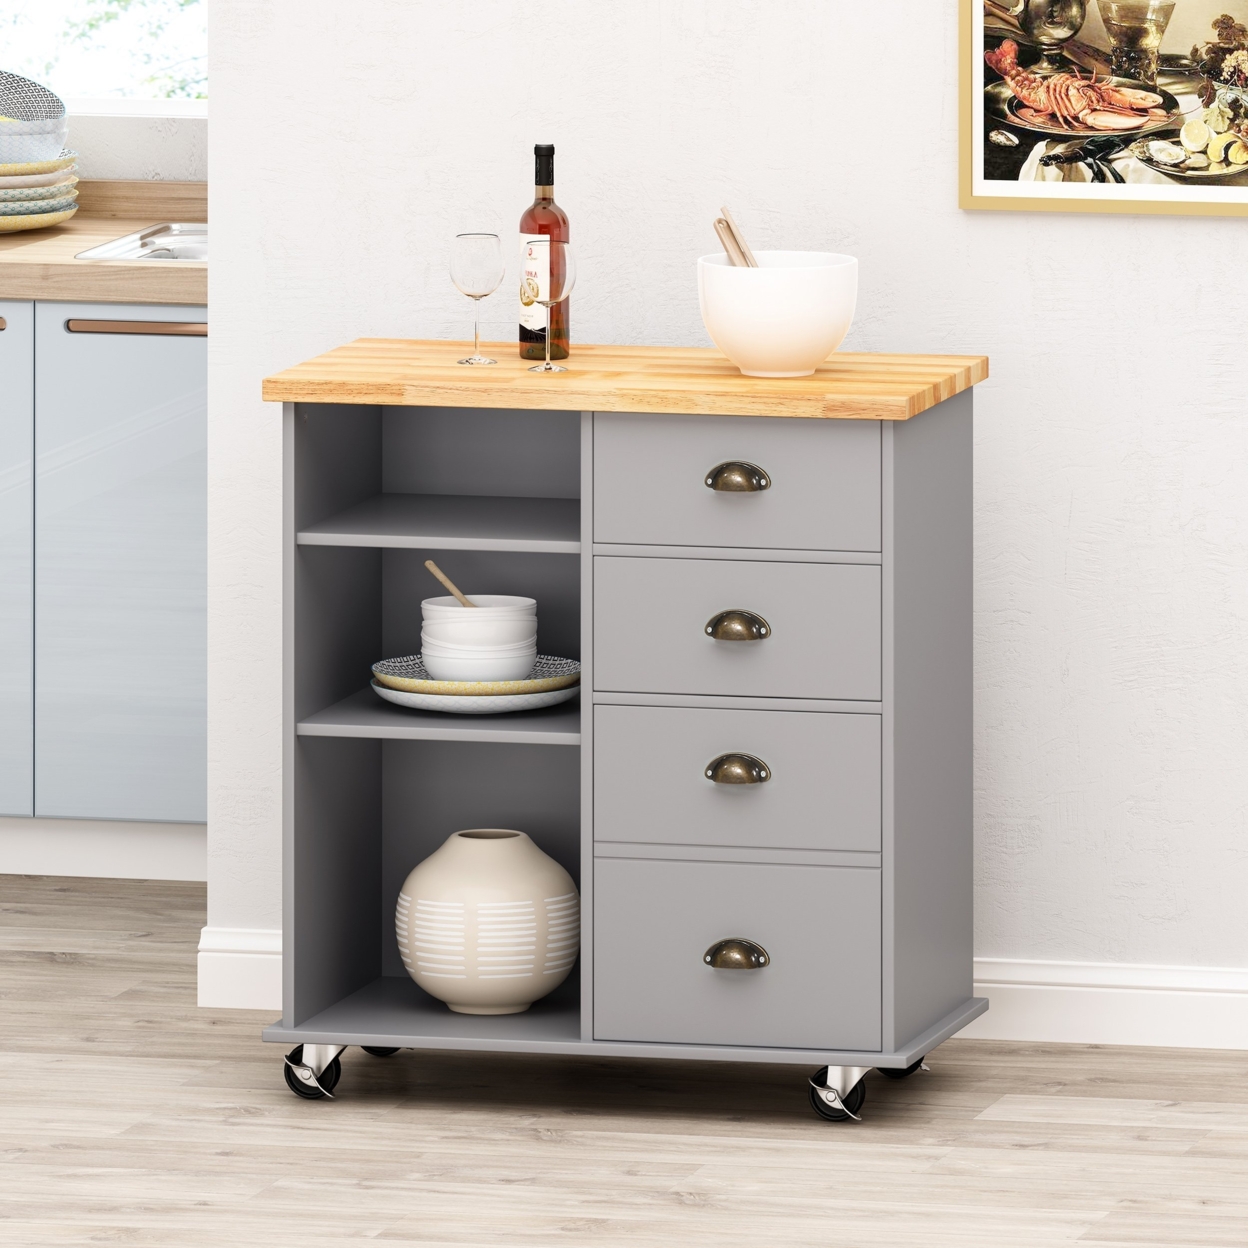 Yohaan Contemporary Kitchen Cart With Wheels - White/natural